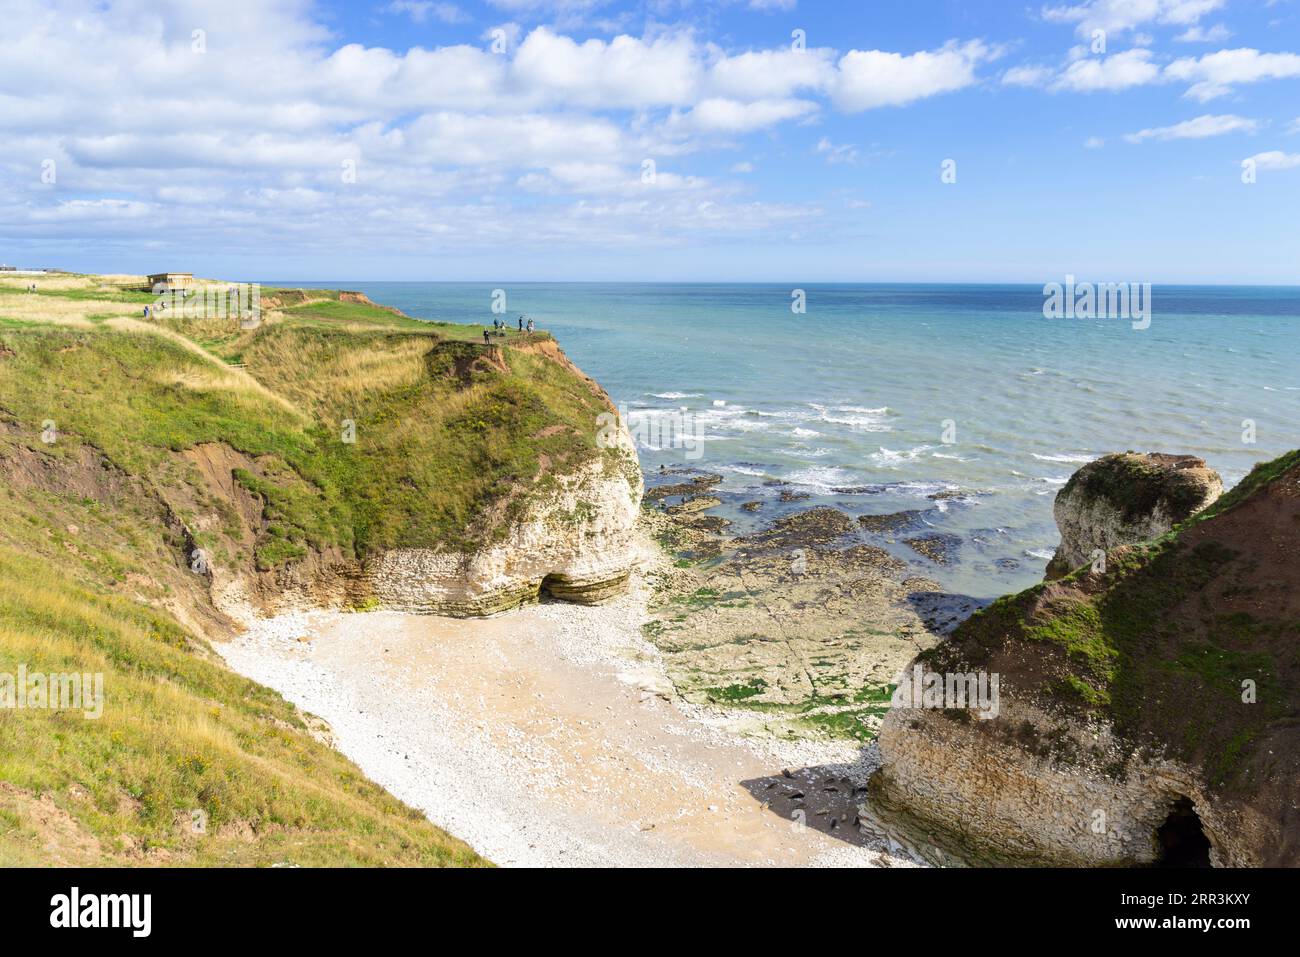 Flamborough Head with people looking at the Drinking Dinosaur rock arch Flamborough Yorkshire coast East Riding of Yorkshire England uk gb Europe Stock Photo